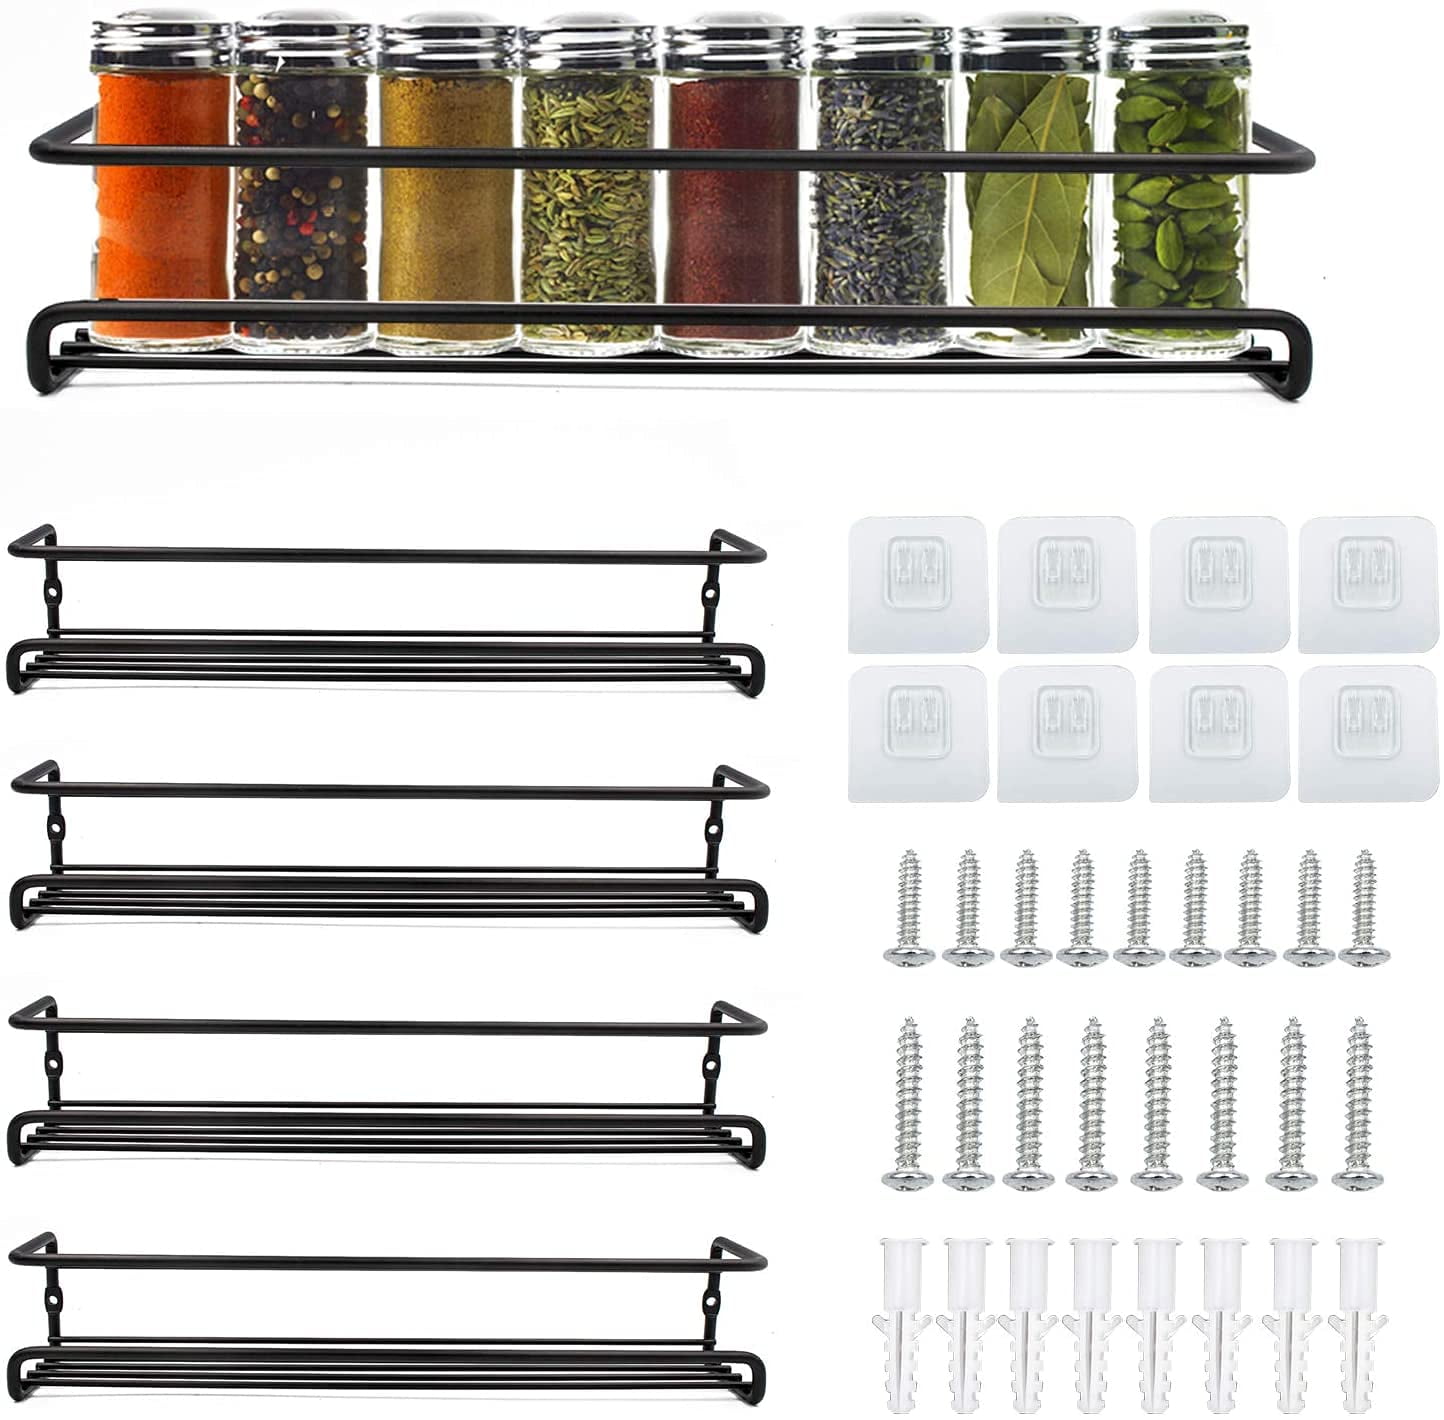  Bunoxea Spice Rack wall mounted 4 Pack, Space-Saving Spice  Organizer for Spice Jars and Seasonings,Screw or Adhesive Hanging Spice  Rack Organizer for Your Kitchen Cabinet,or Pantry Door : Home & Kitchen